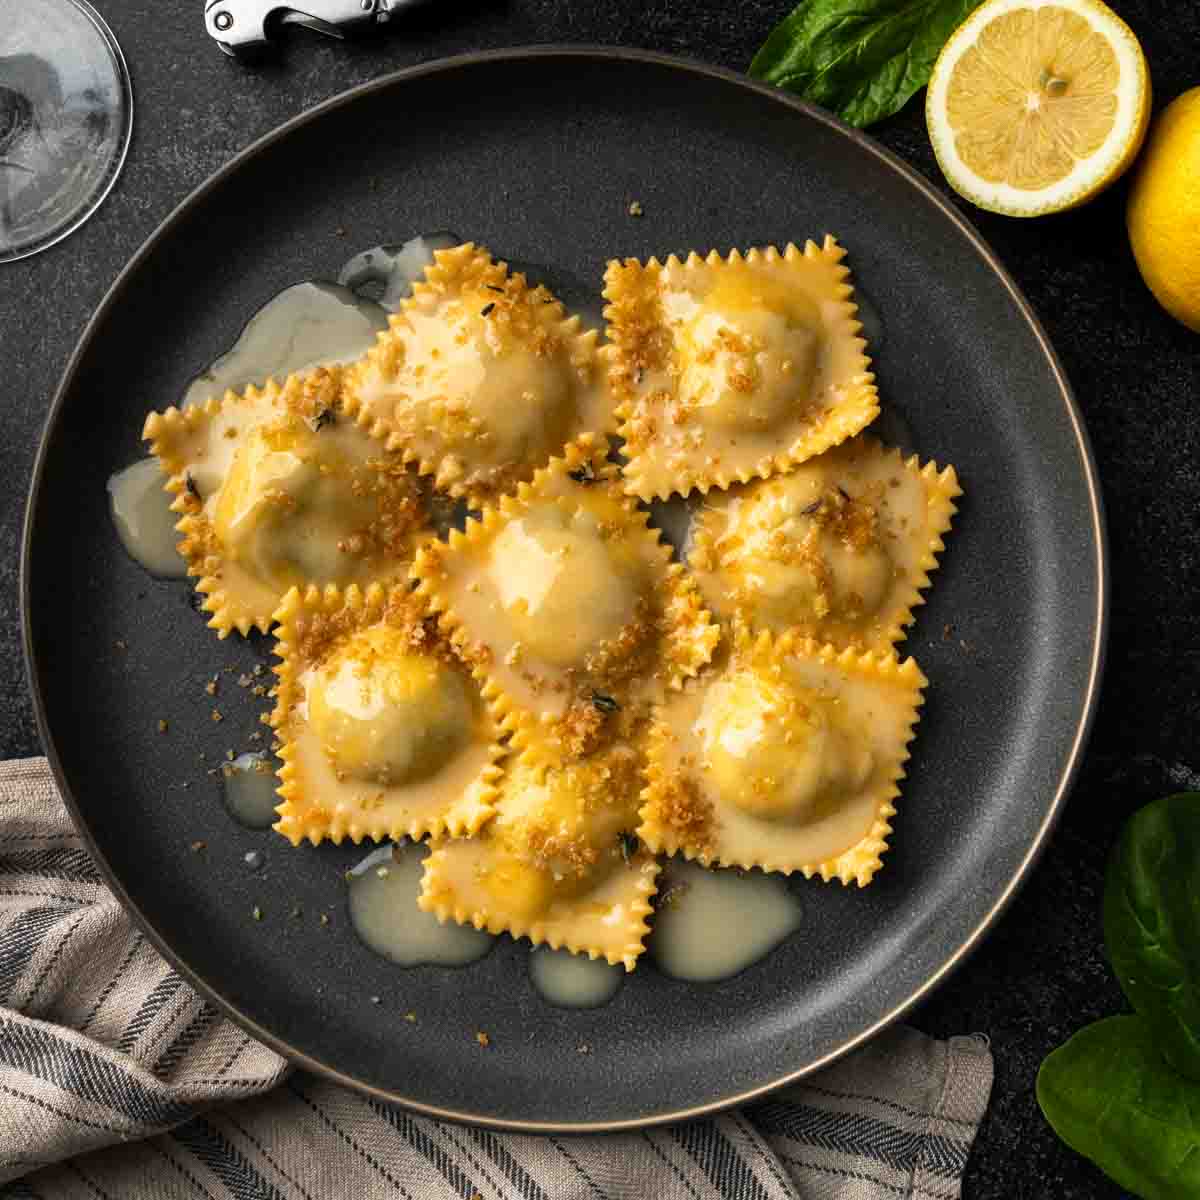 A plate of homemade ravioli dressed in white wine lemon butter sauce.